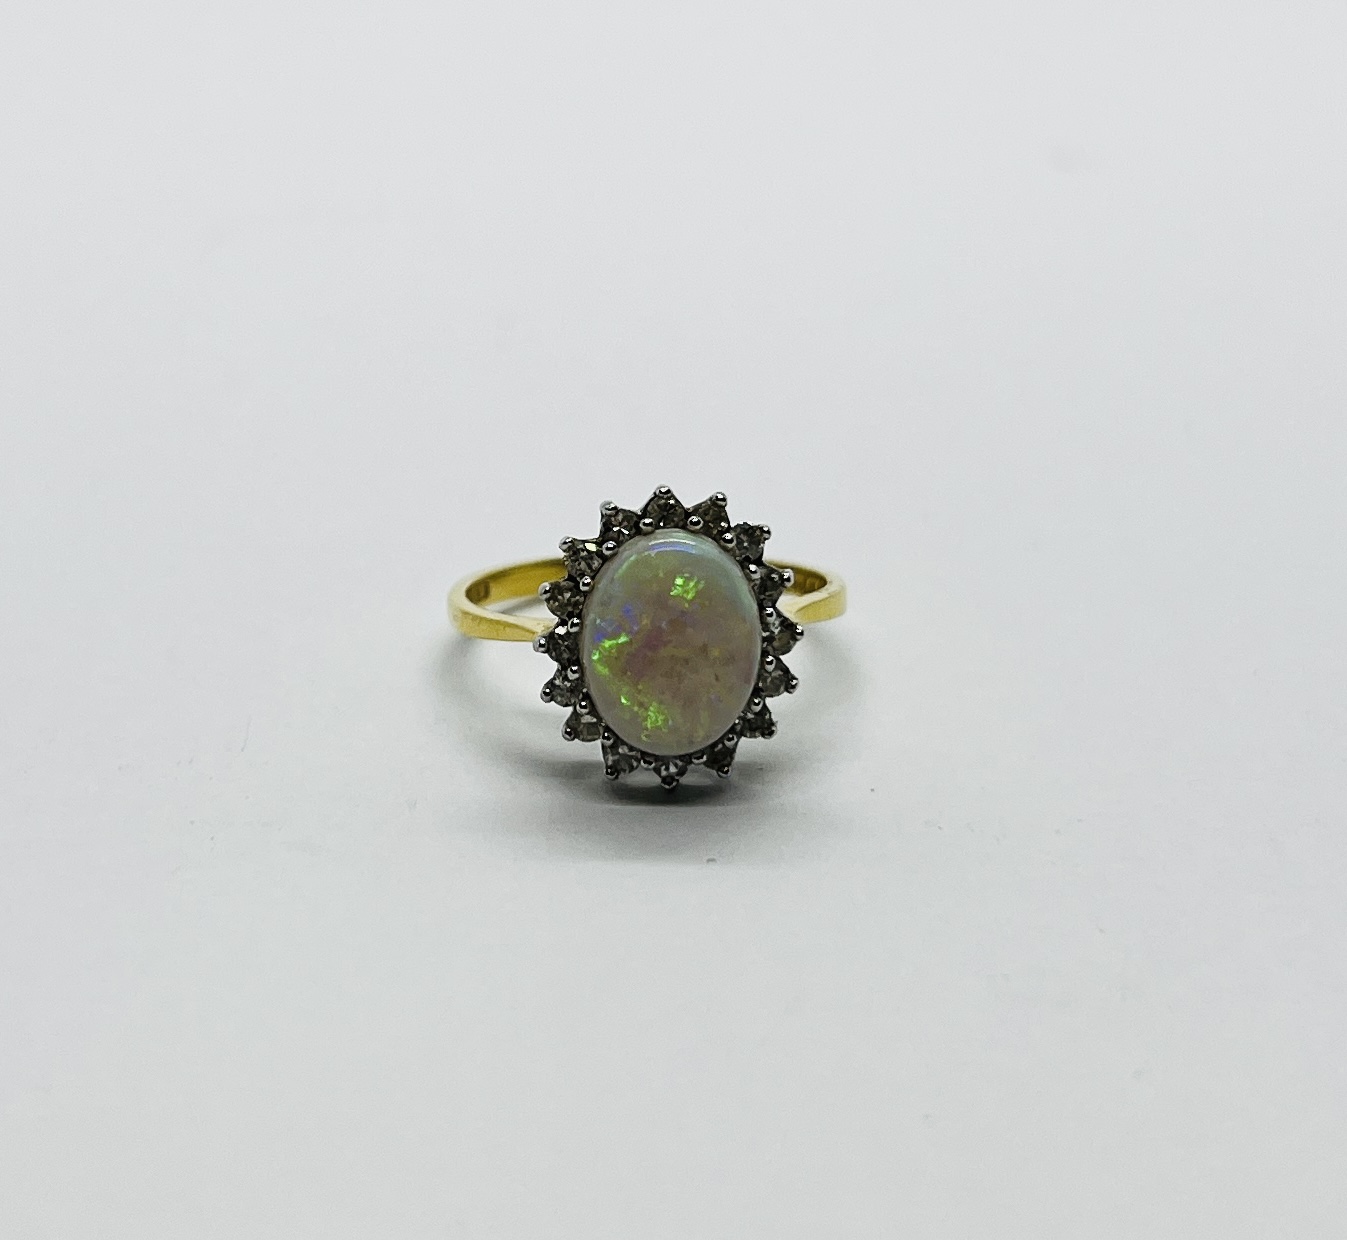 AN 18CT GOLD RING SET WITH A CENTRAL OVAL OPAL SURROUNDED BY DIAMONDS.